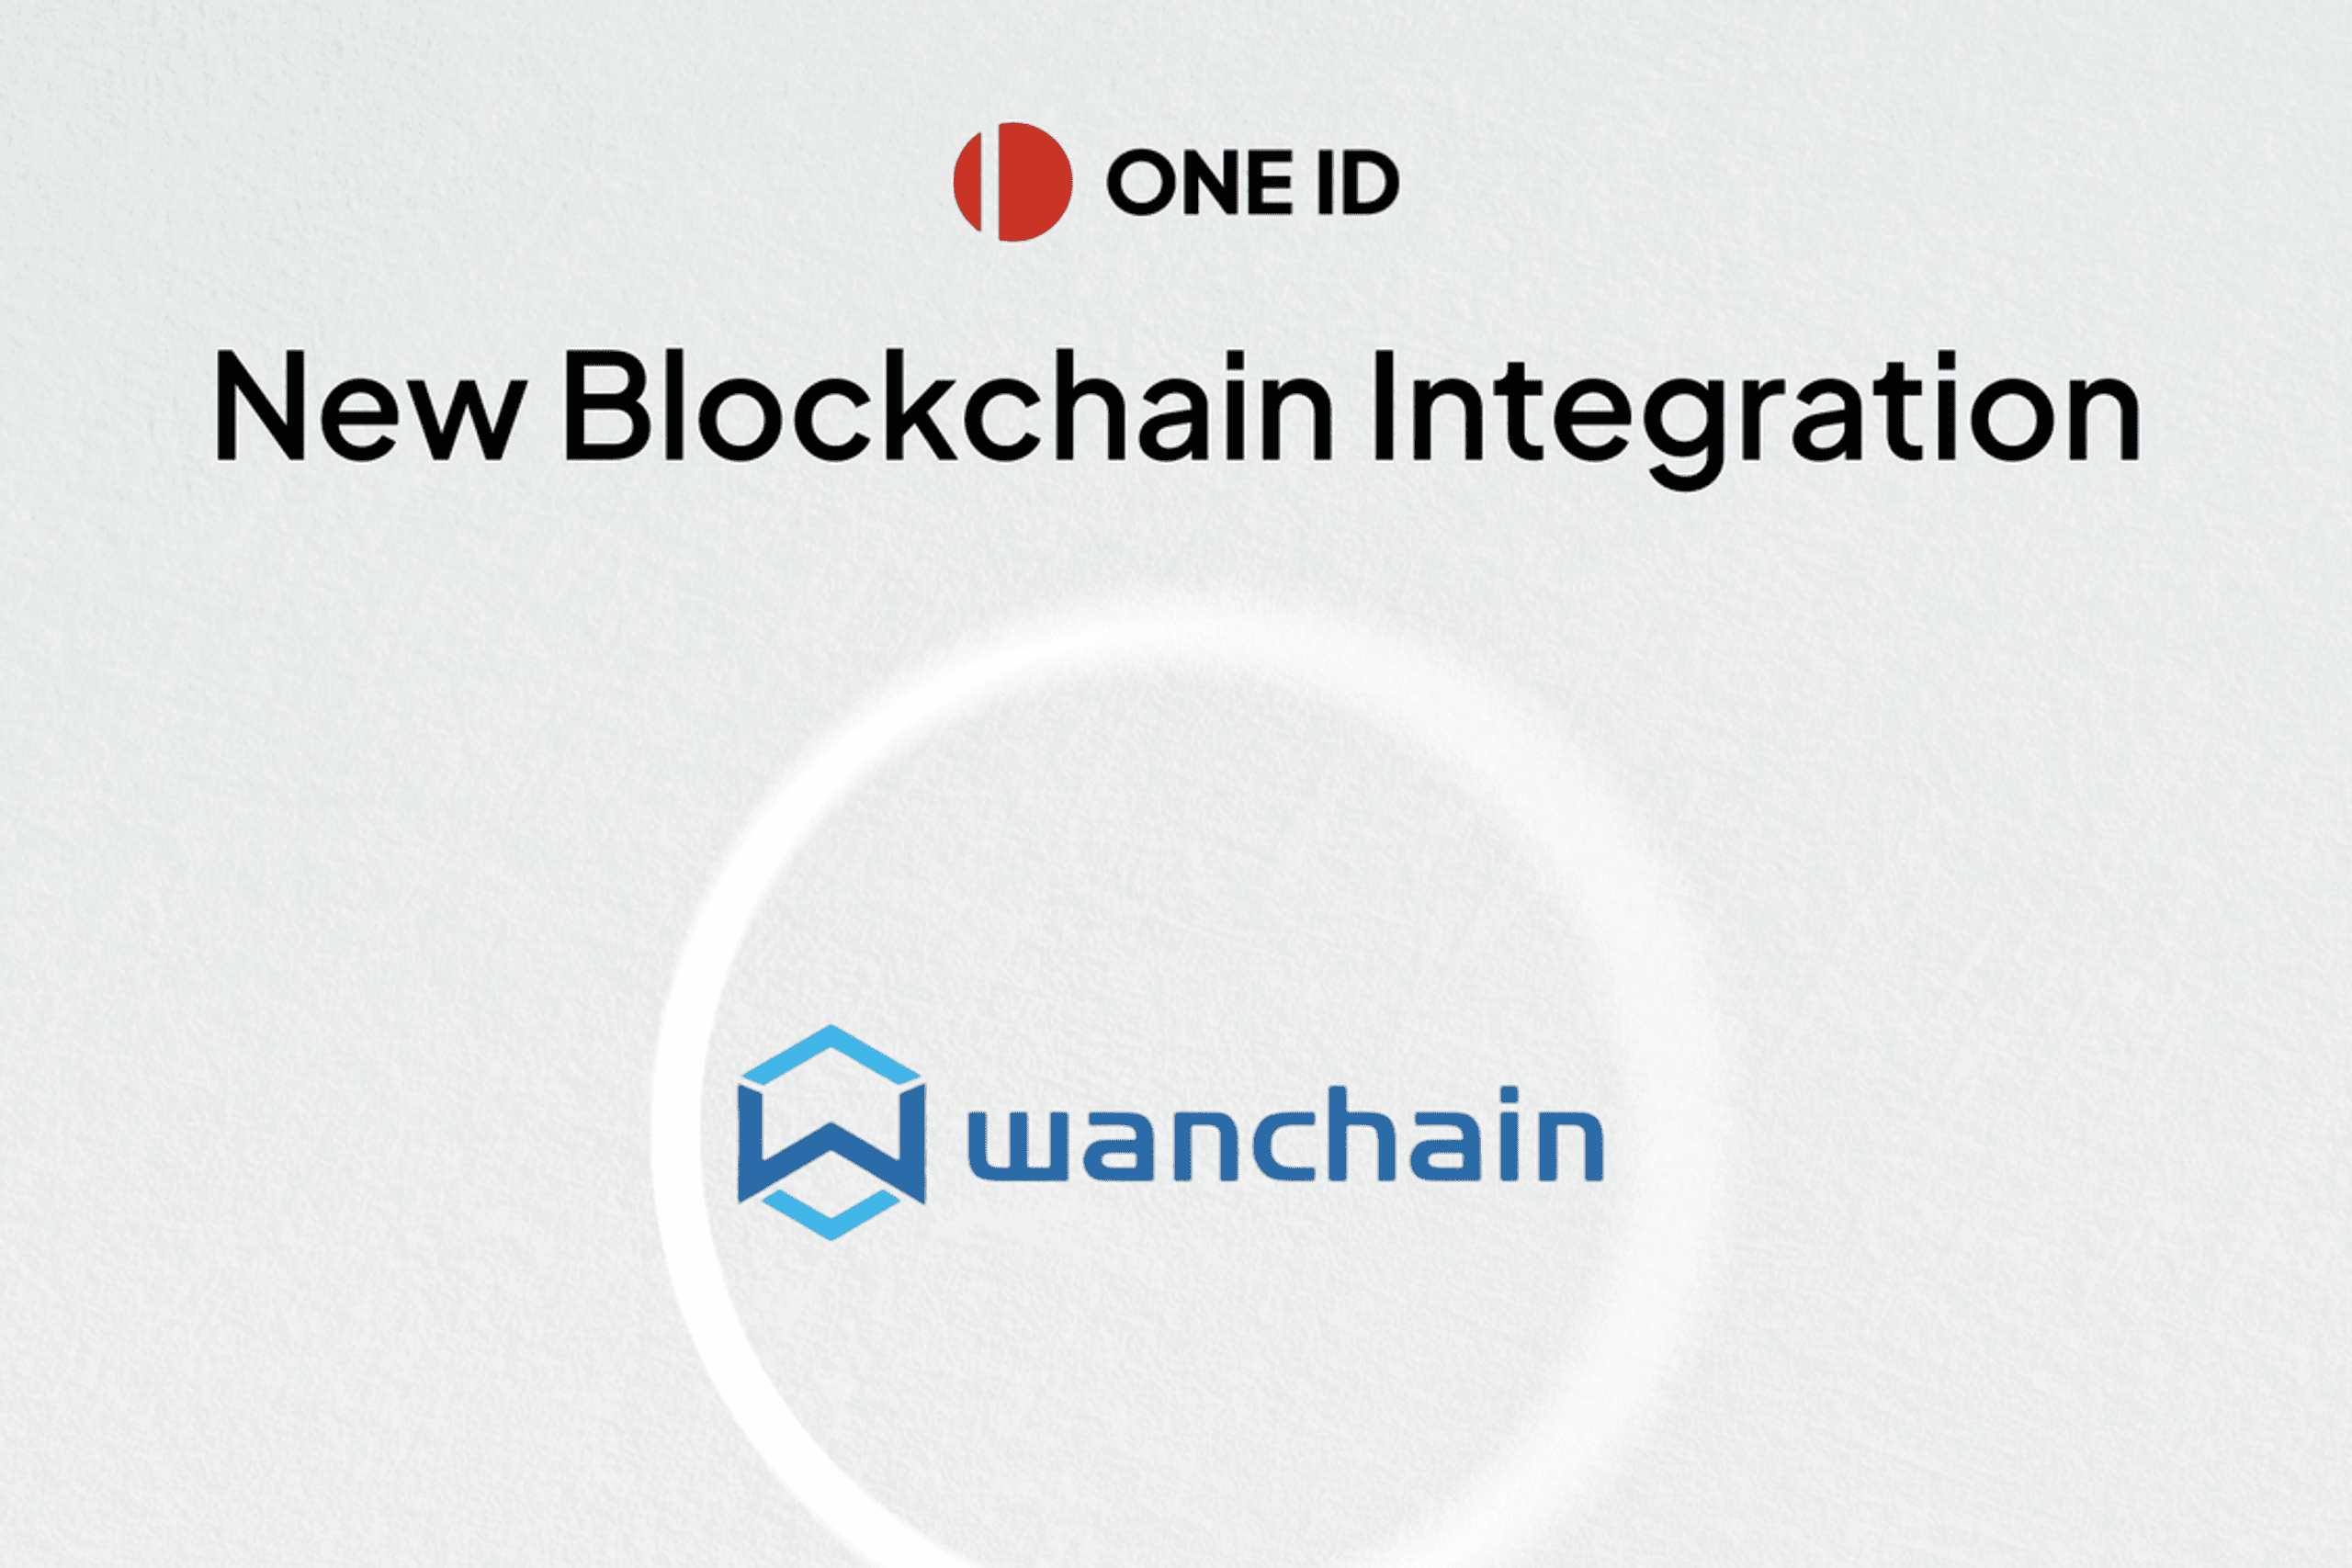 OneID and Wanchain: Empowering Users With Seamless Cross-Chain Identity Management